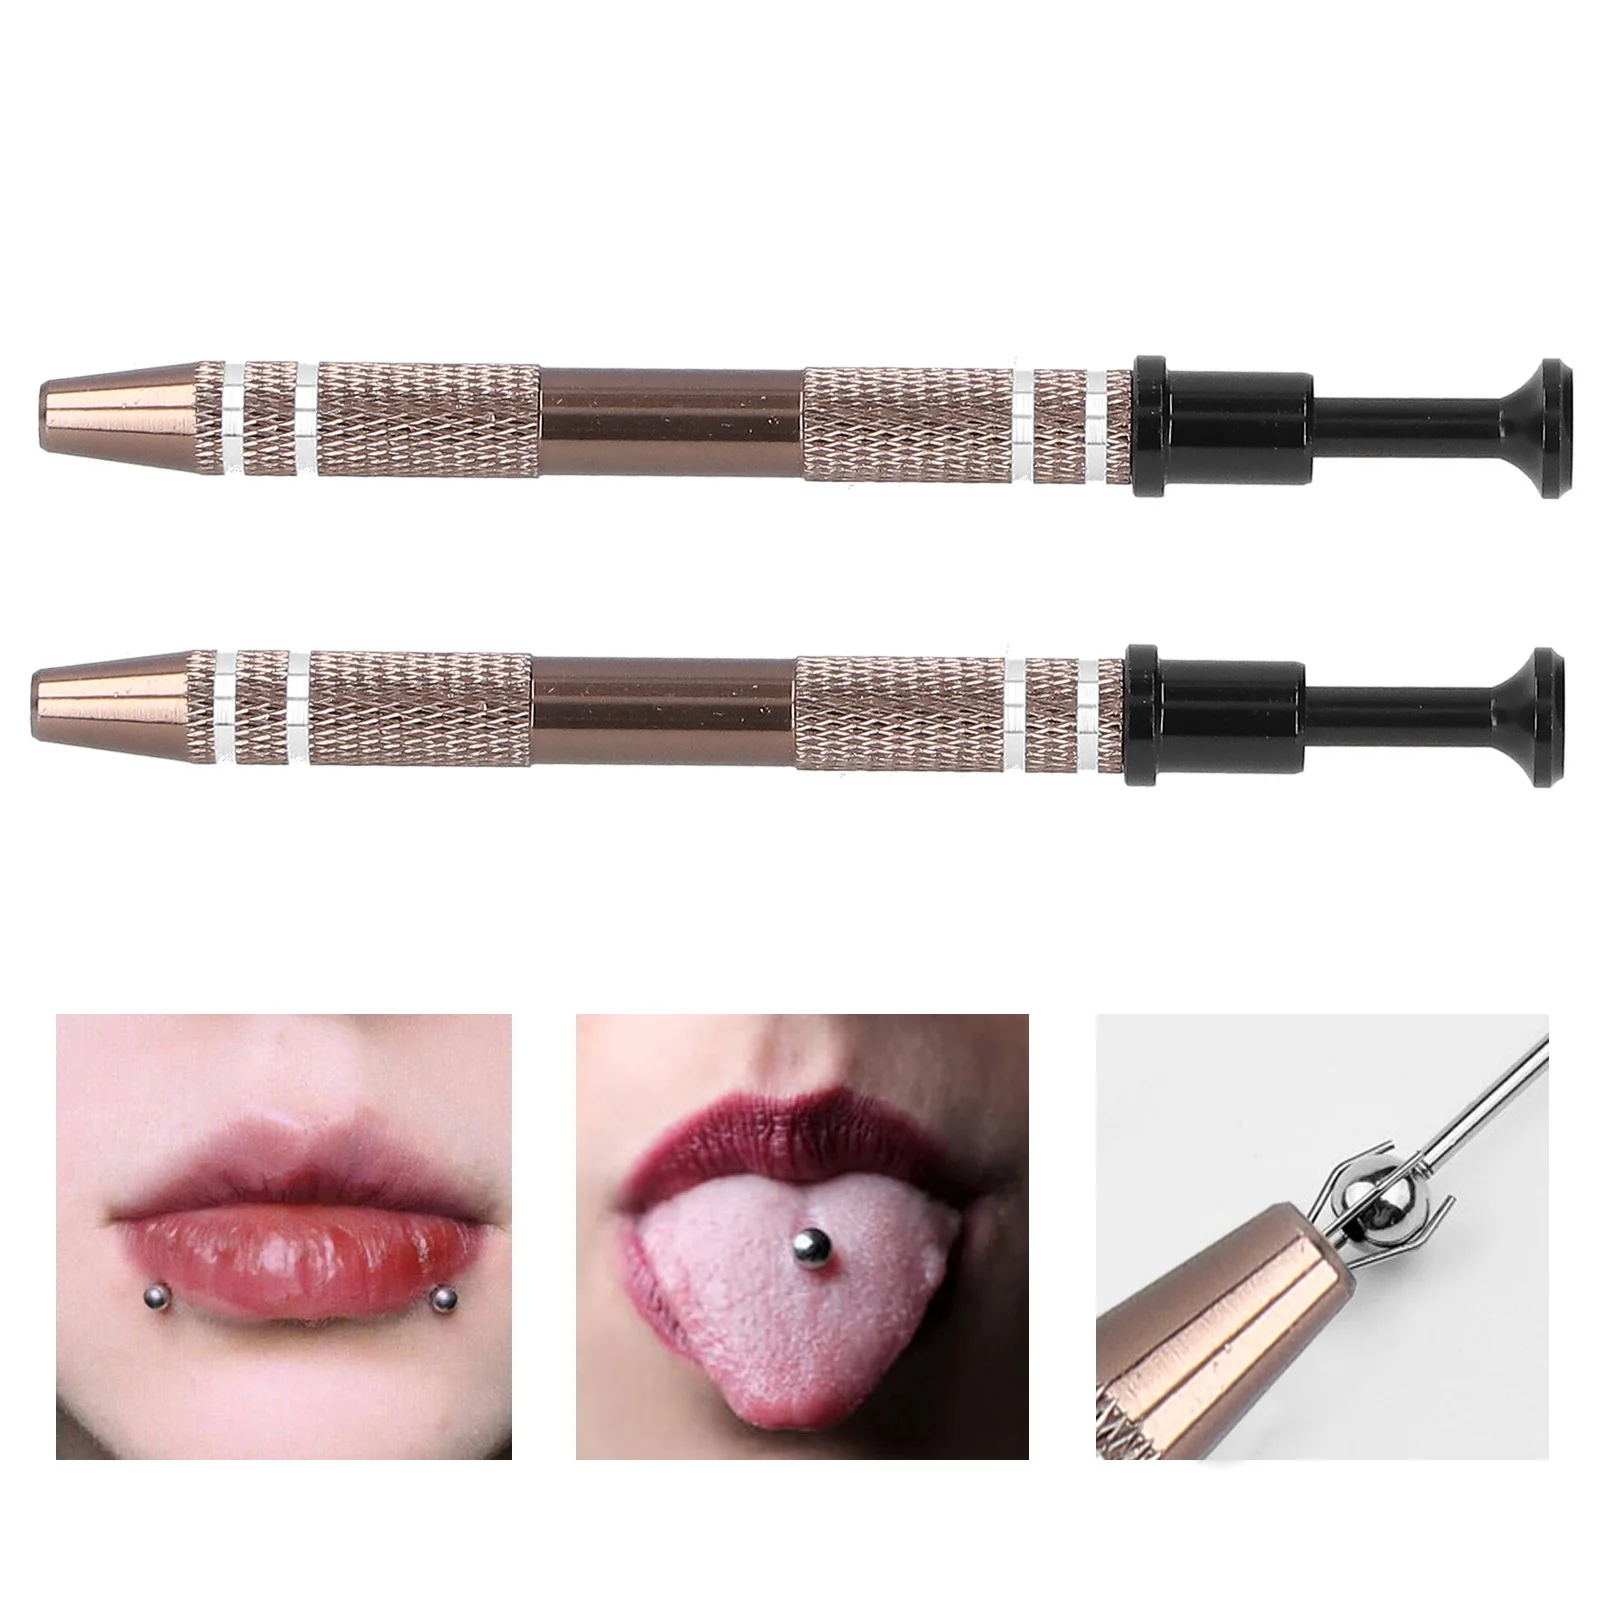 2Pcs Microblading Alloy High Precision 4 Prongs Bead Holder Jewelry Bead Grasping Pick Up Tool Body Tattoo Piercing Accessories 1pc jewelry holder bead gem pick up tool diamonds gemstones grabbing catcher grabber tweezers earring rings making tools